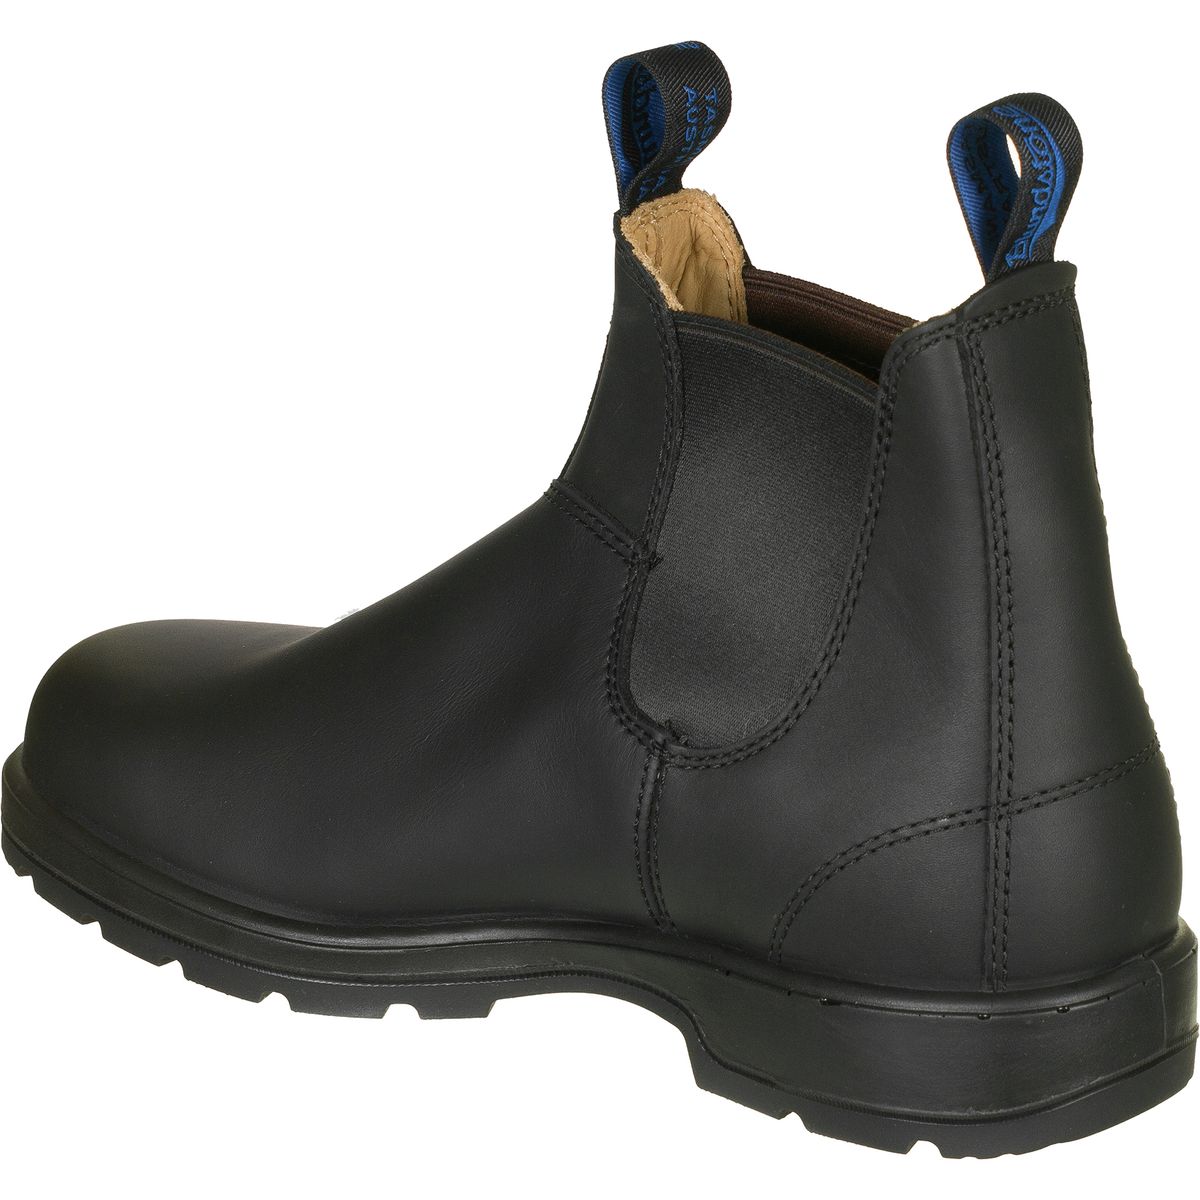 Blundstone Thermal Boot - Men's | Backcountry.com